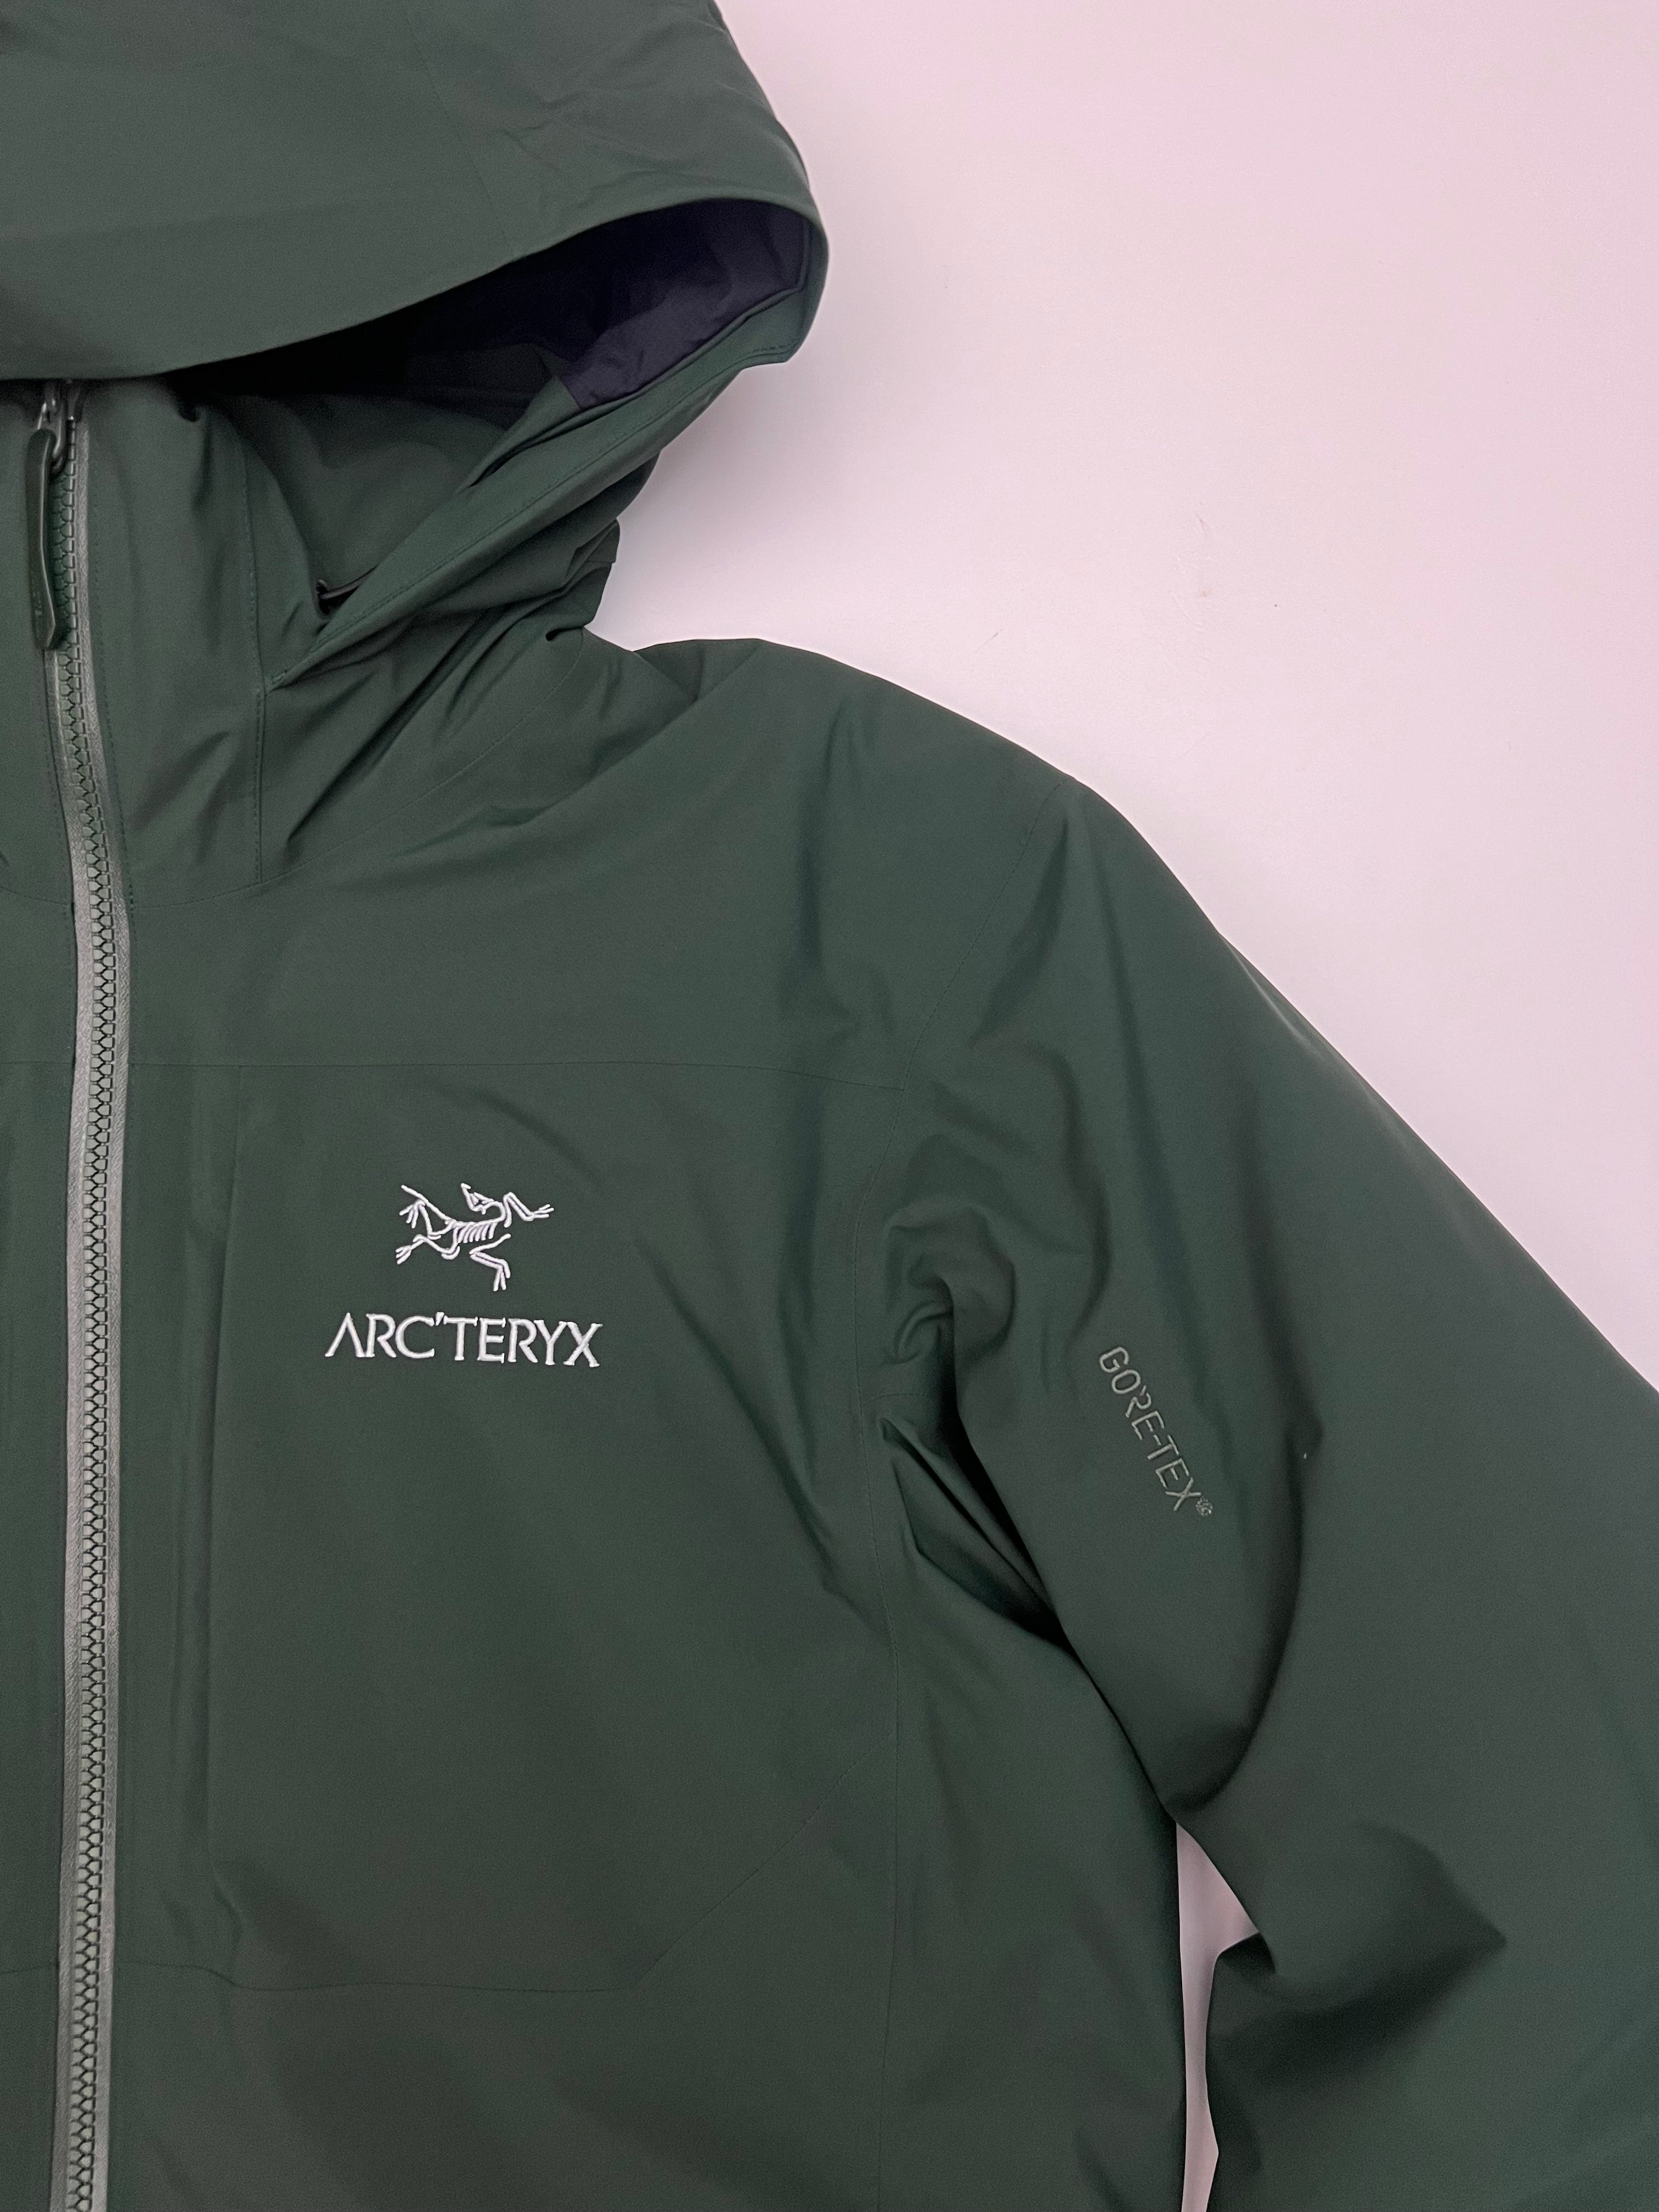 Arc’teryx Fission SV Jacket Conifer Green Men’s S Small Gore-Tex Insulated